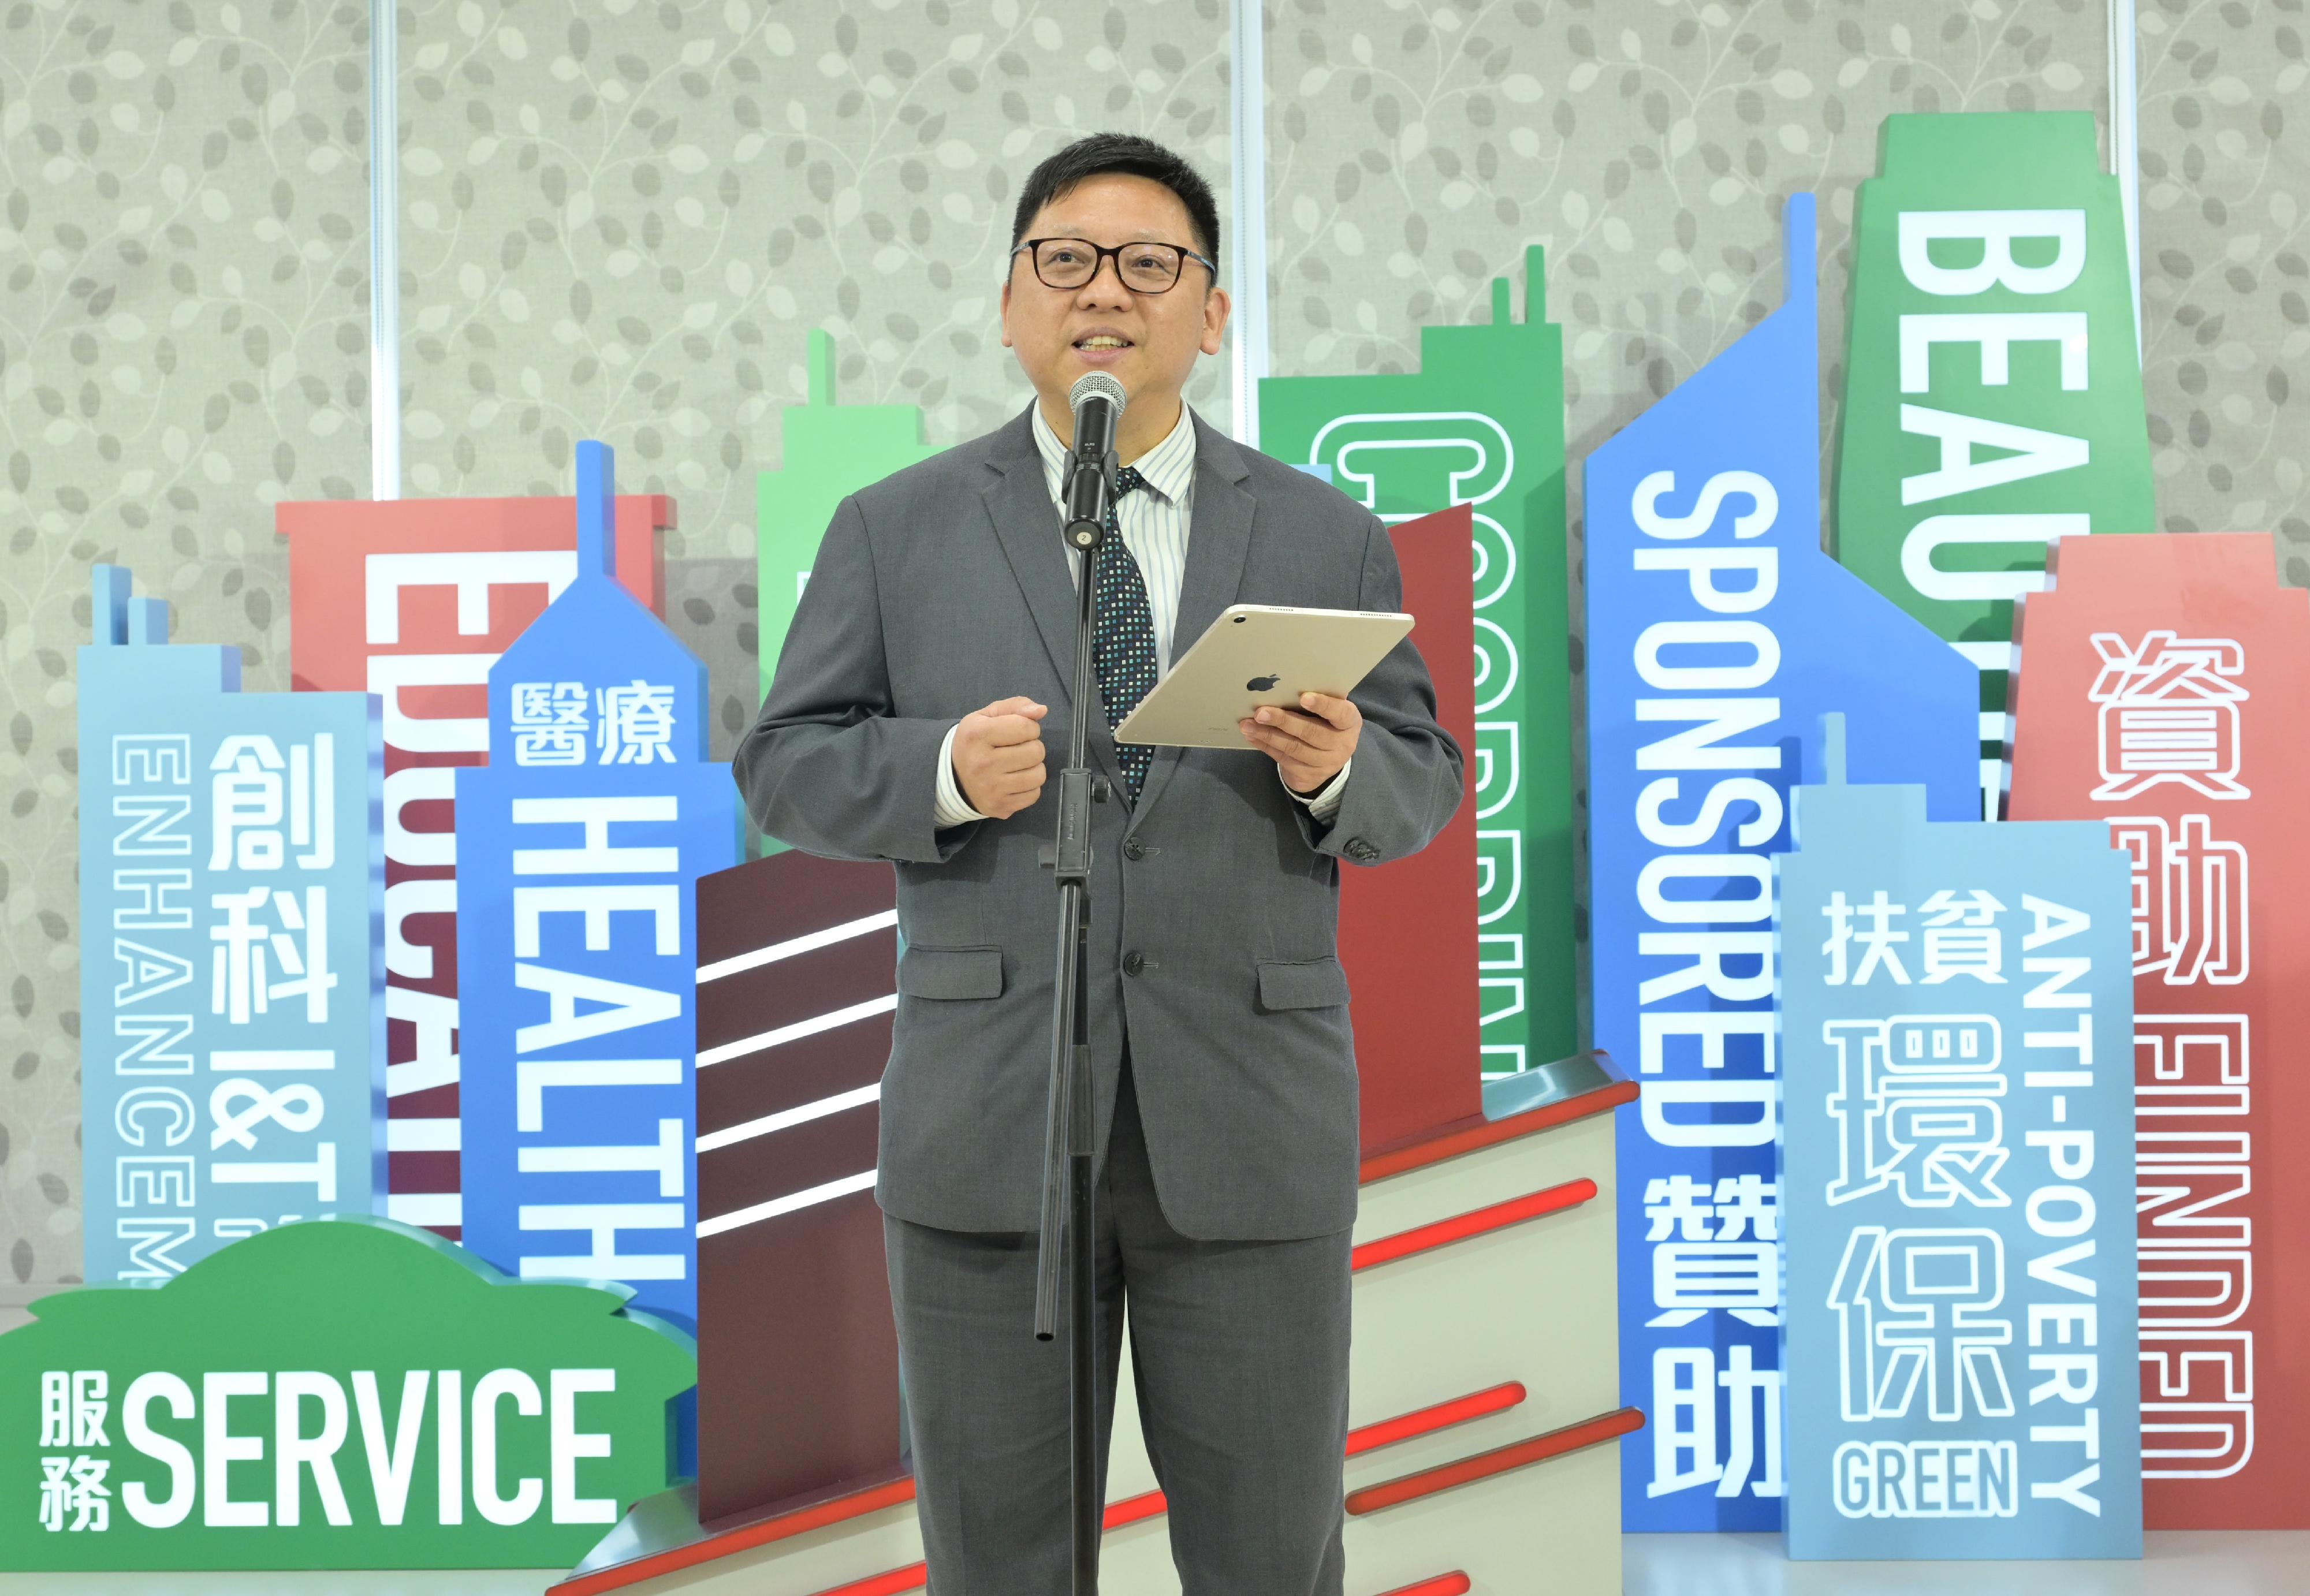 The Director of Information Services, Mr Fletch Chan, officiated at the launch event for the government new promotional logo today (January 18). Photo shows Mr Chan introducing the new promotional logo at the event.